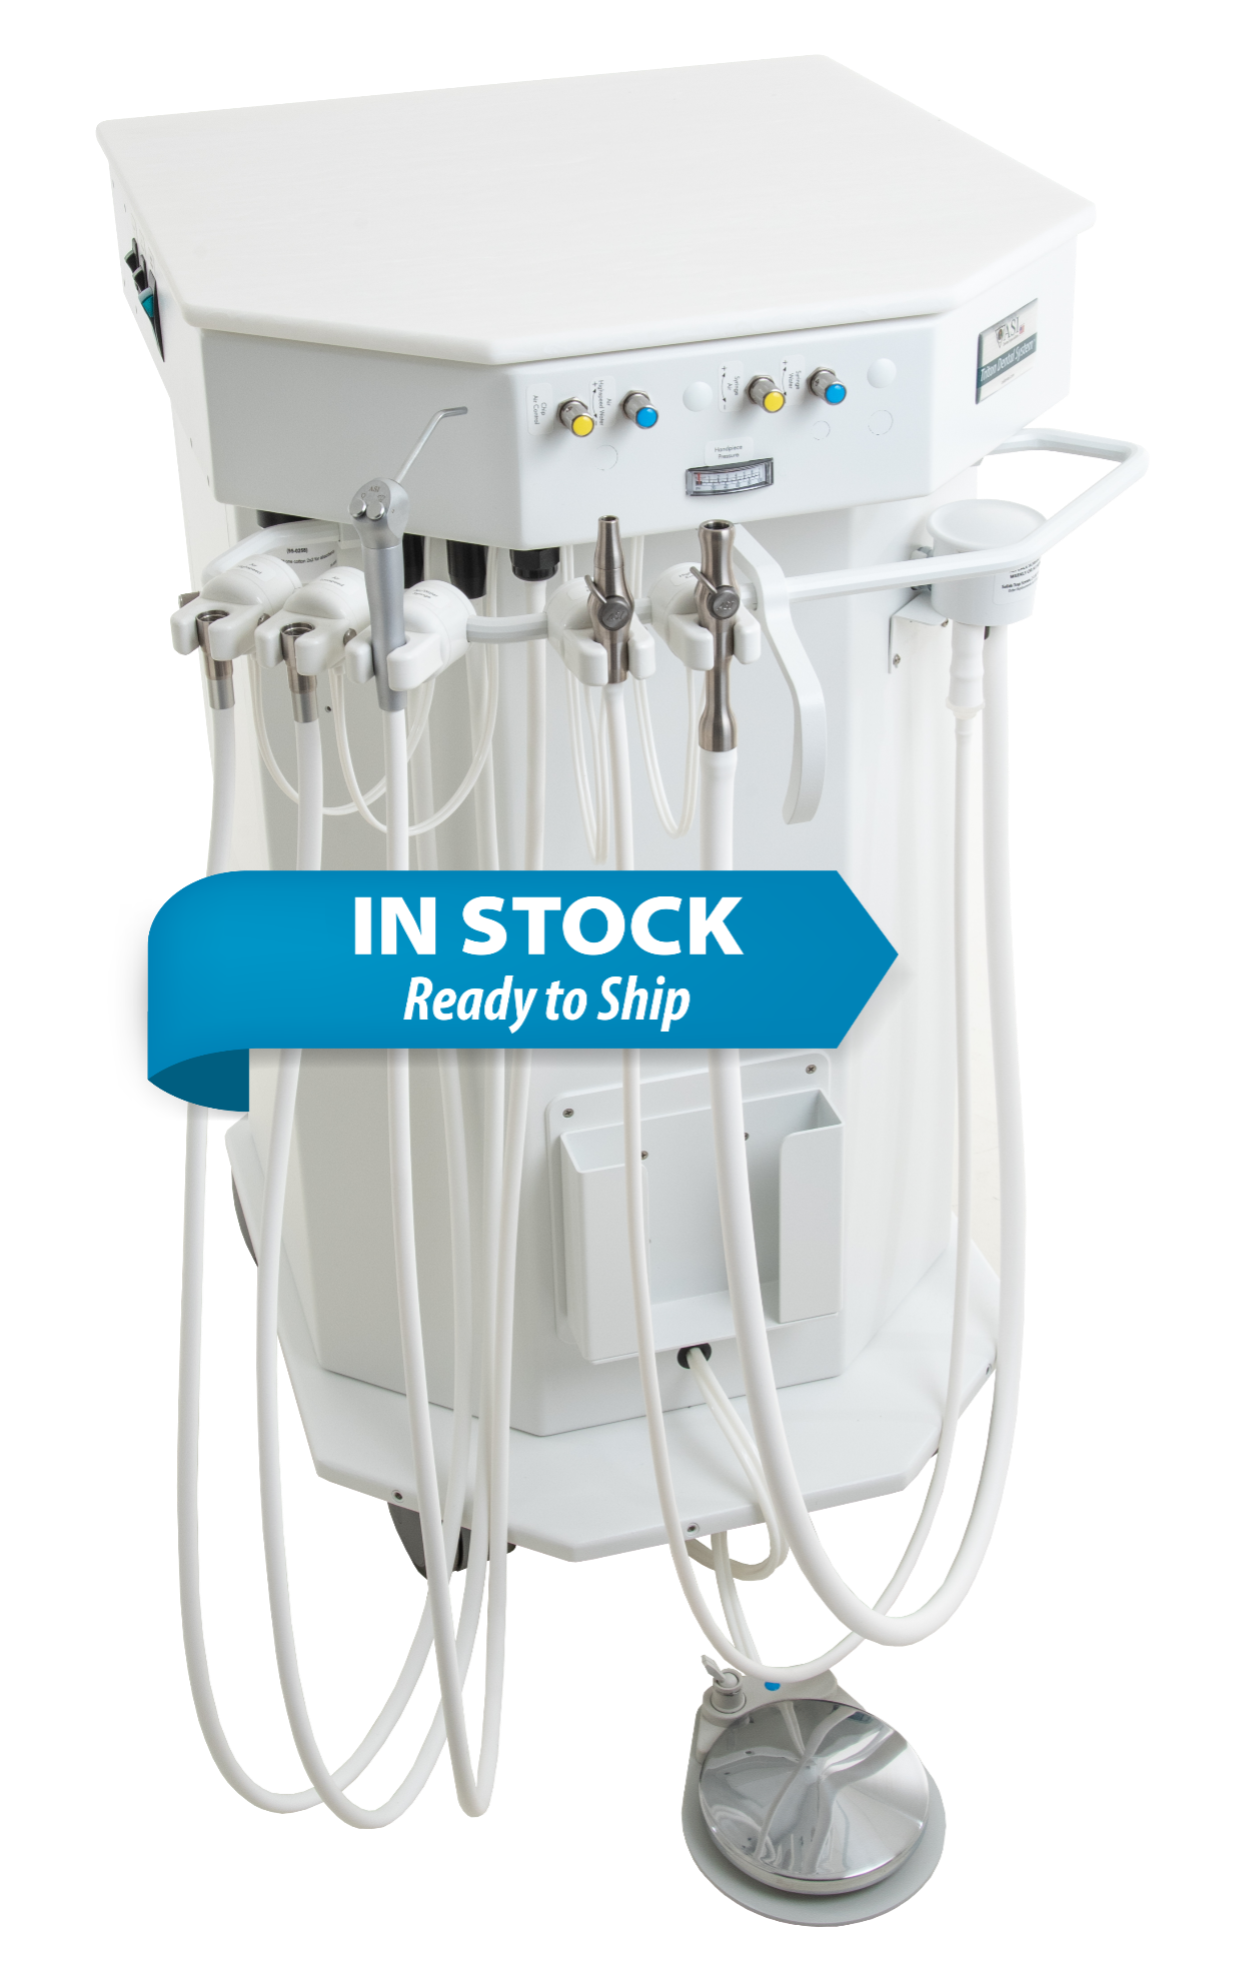 ASI Dental Specialties’ Mobile Dental Units In Stock and Ready to Ship | Image Credit: © ASI Dental Specialties 